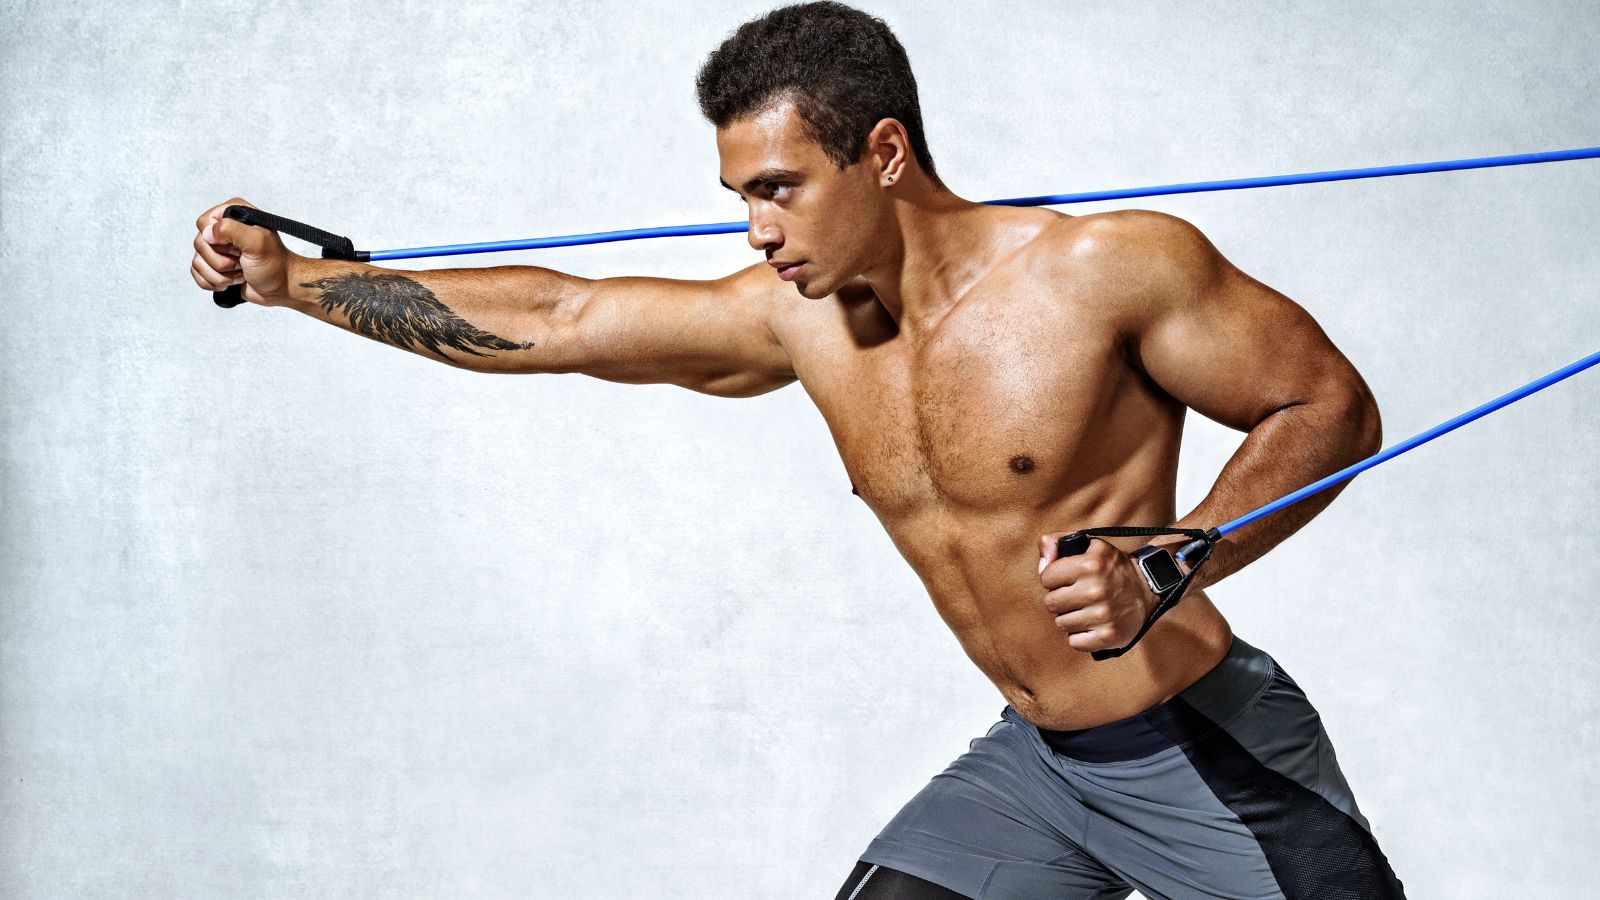 Try This Upper Body Resistance Band Workout to Tone Up